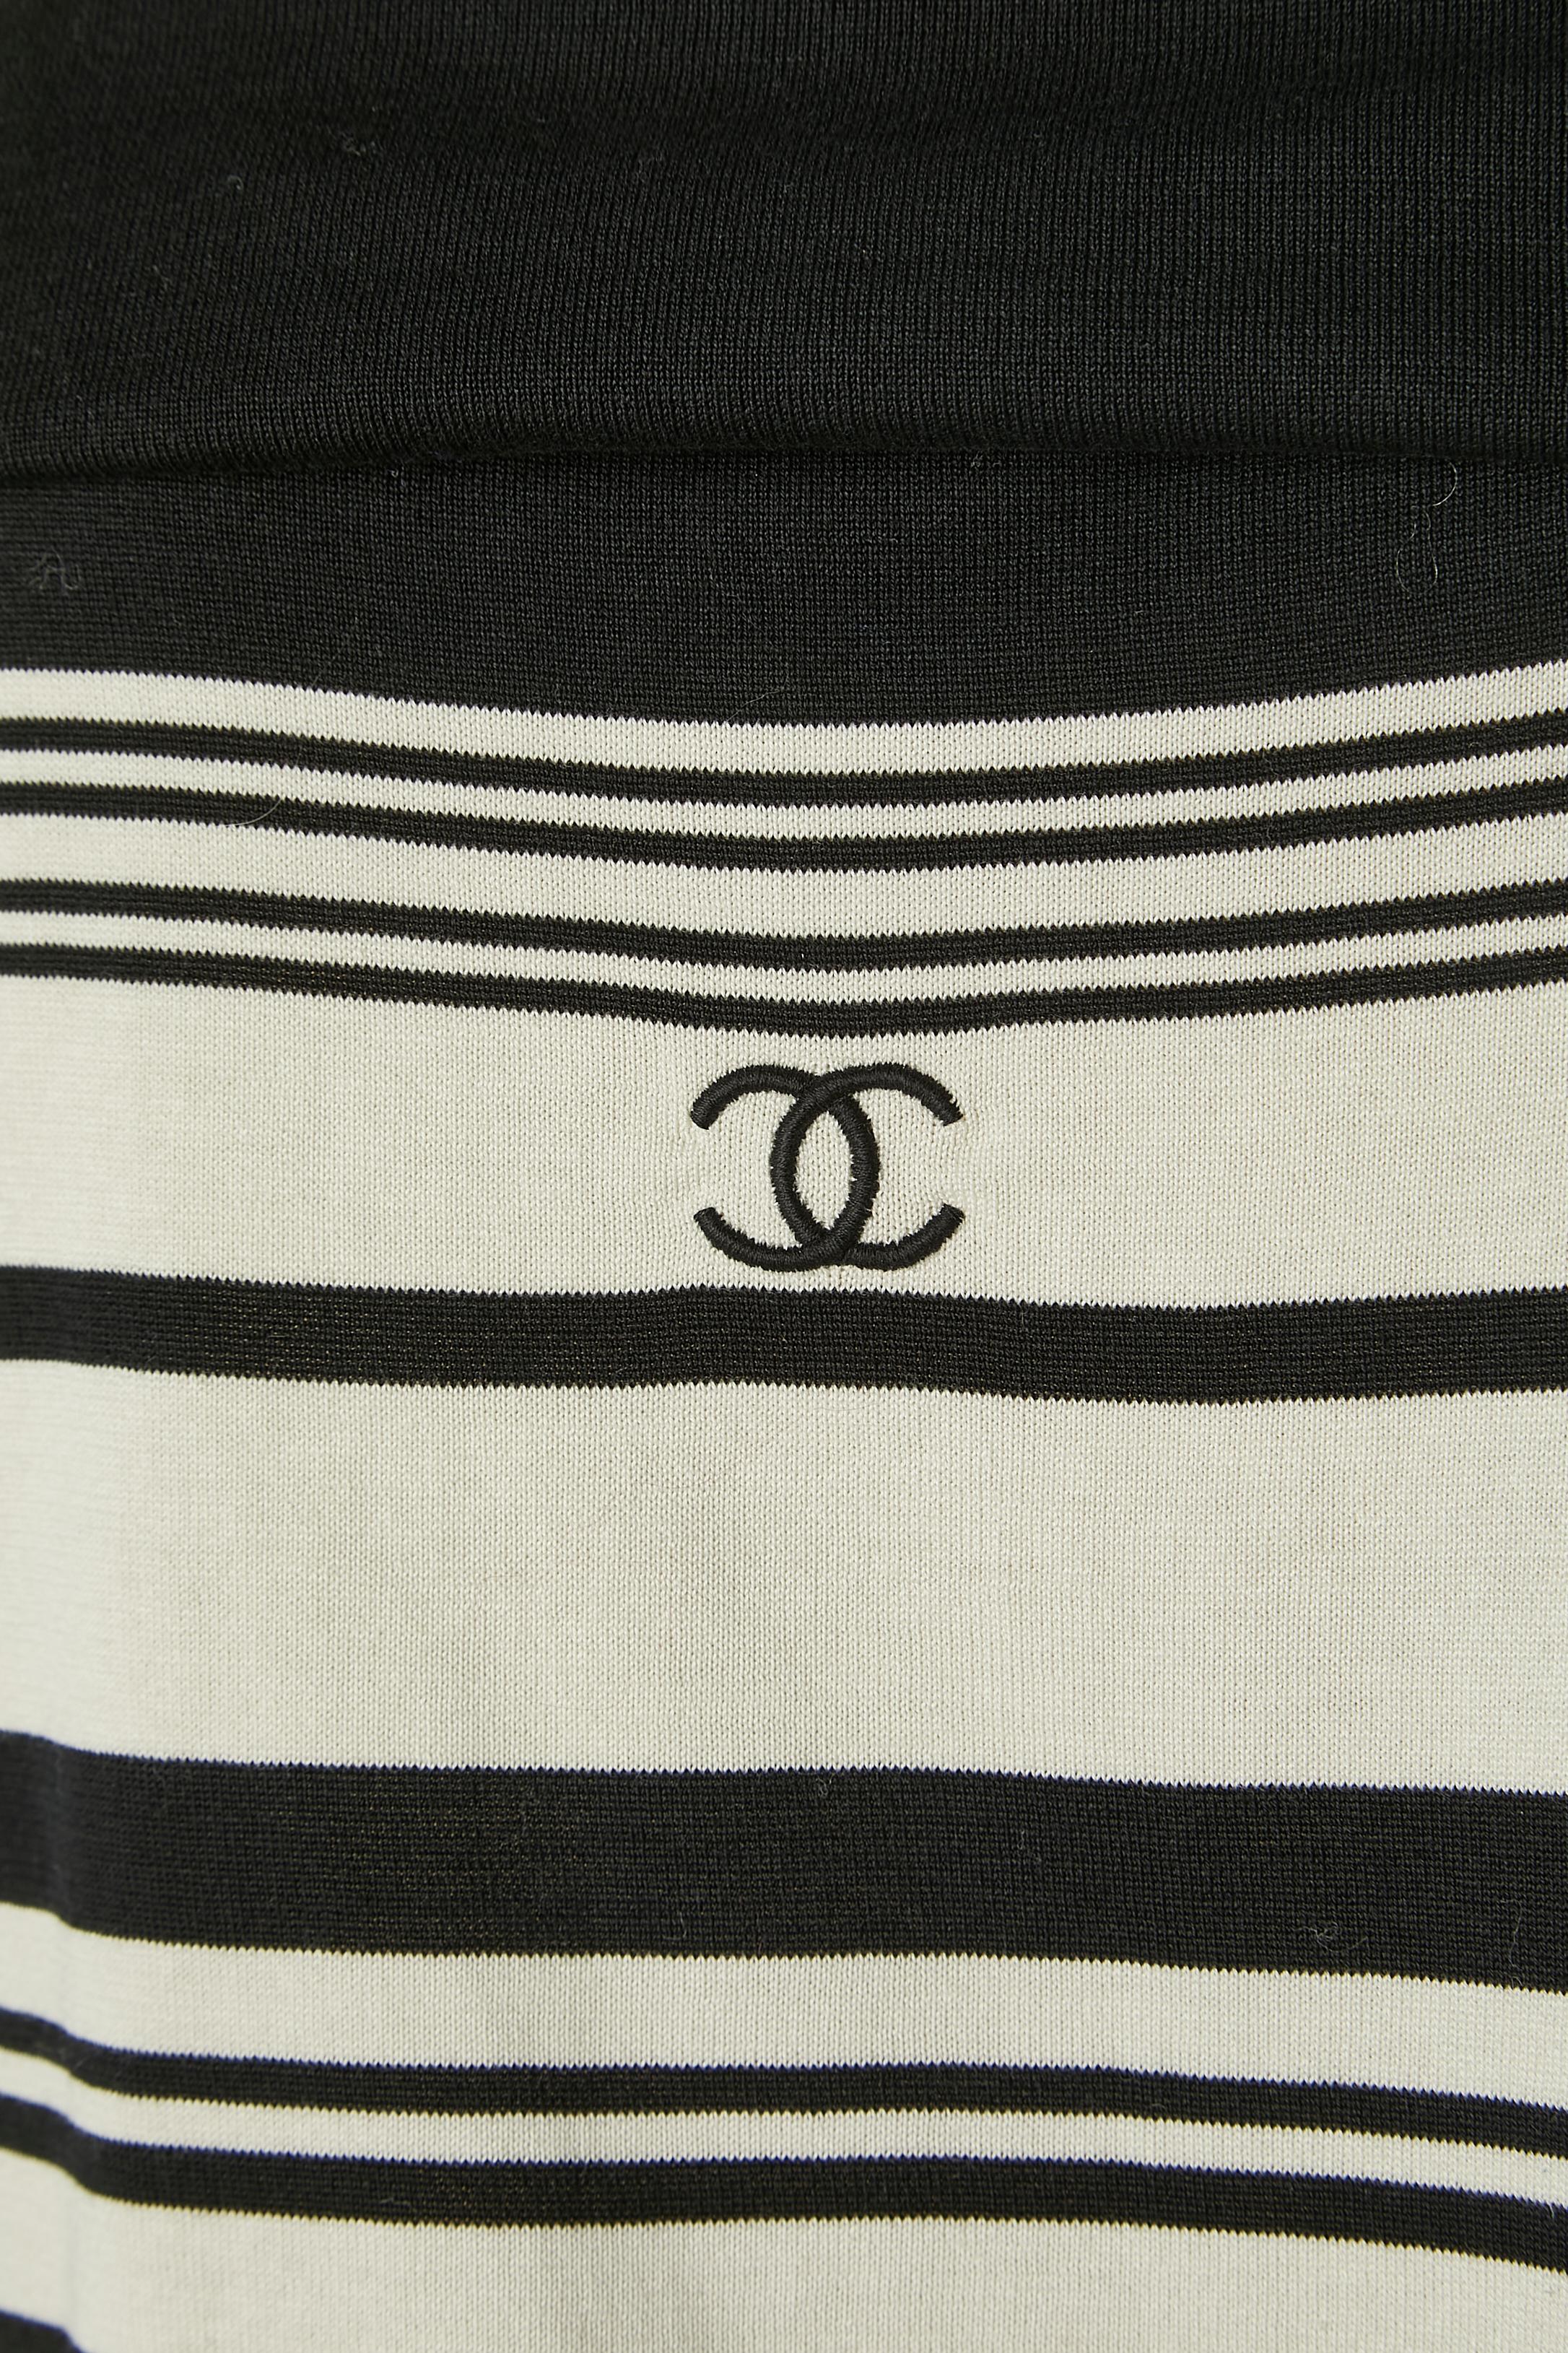 Knit jersey in cotton with black and white striped. 
SIZE 44 (Fr) 14 (Us) 